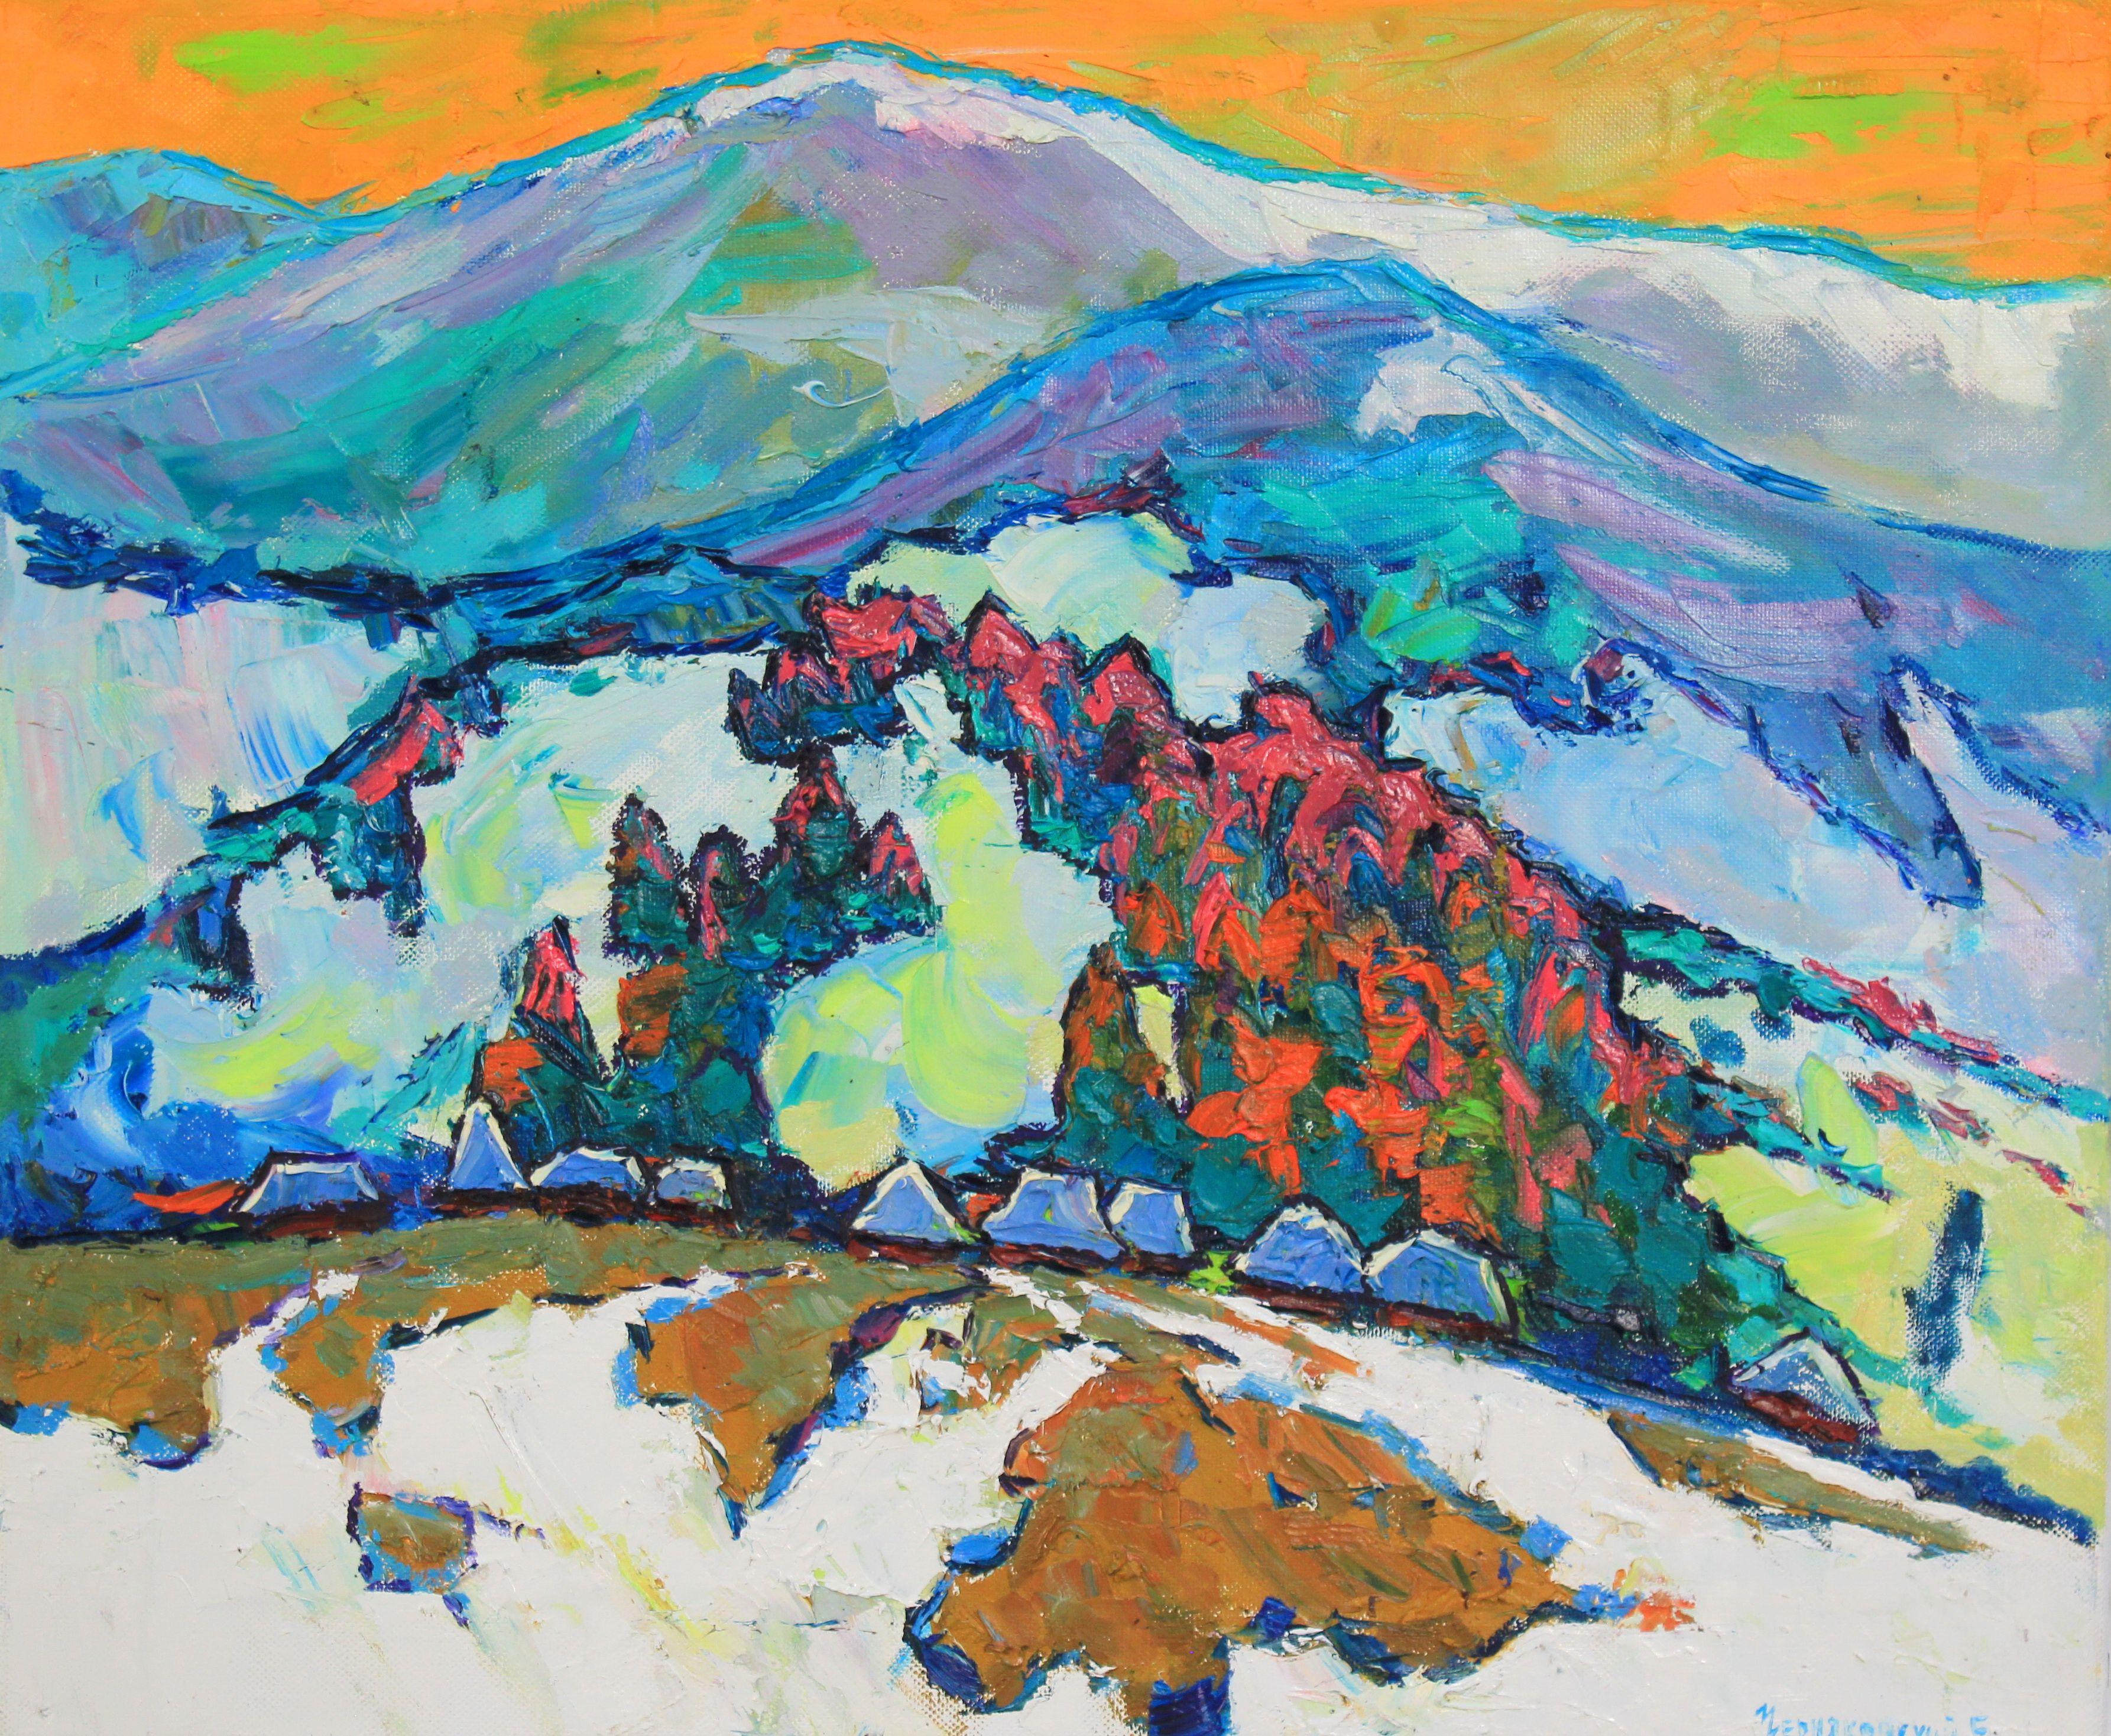 Original Oil painting by Ukrainian artist Evgeny Chernyakovsky    "  winter in the mountains  "  50.0 X 60.0 CM / 19.6 X 23.6 IN  HIGH QUALITY oil on canvas  Signed on the front and back  Dated 2020  Good condition  GUARANTEE OF AUTHENTICITY   ::